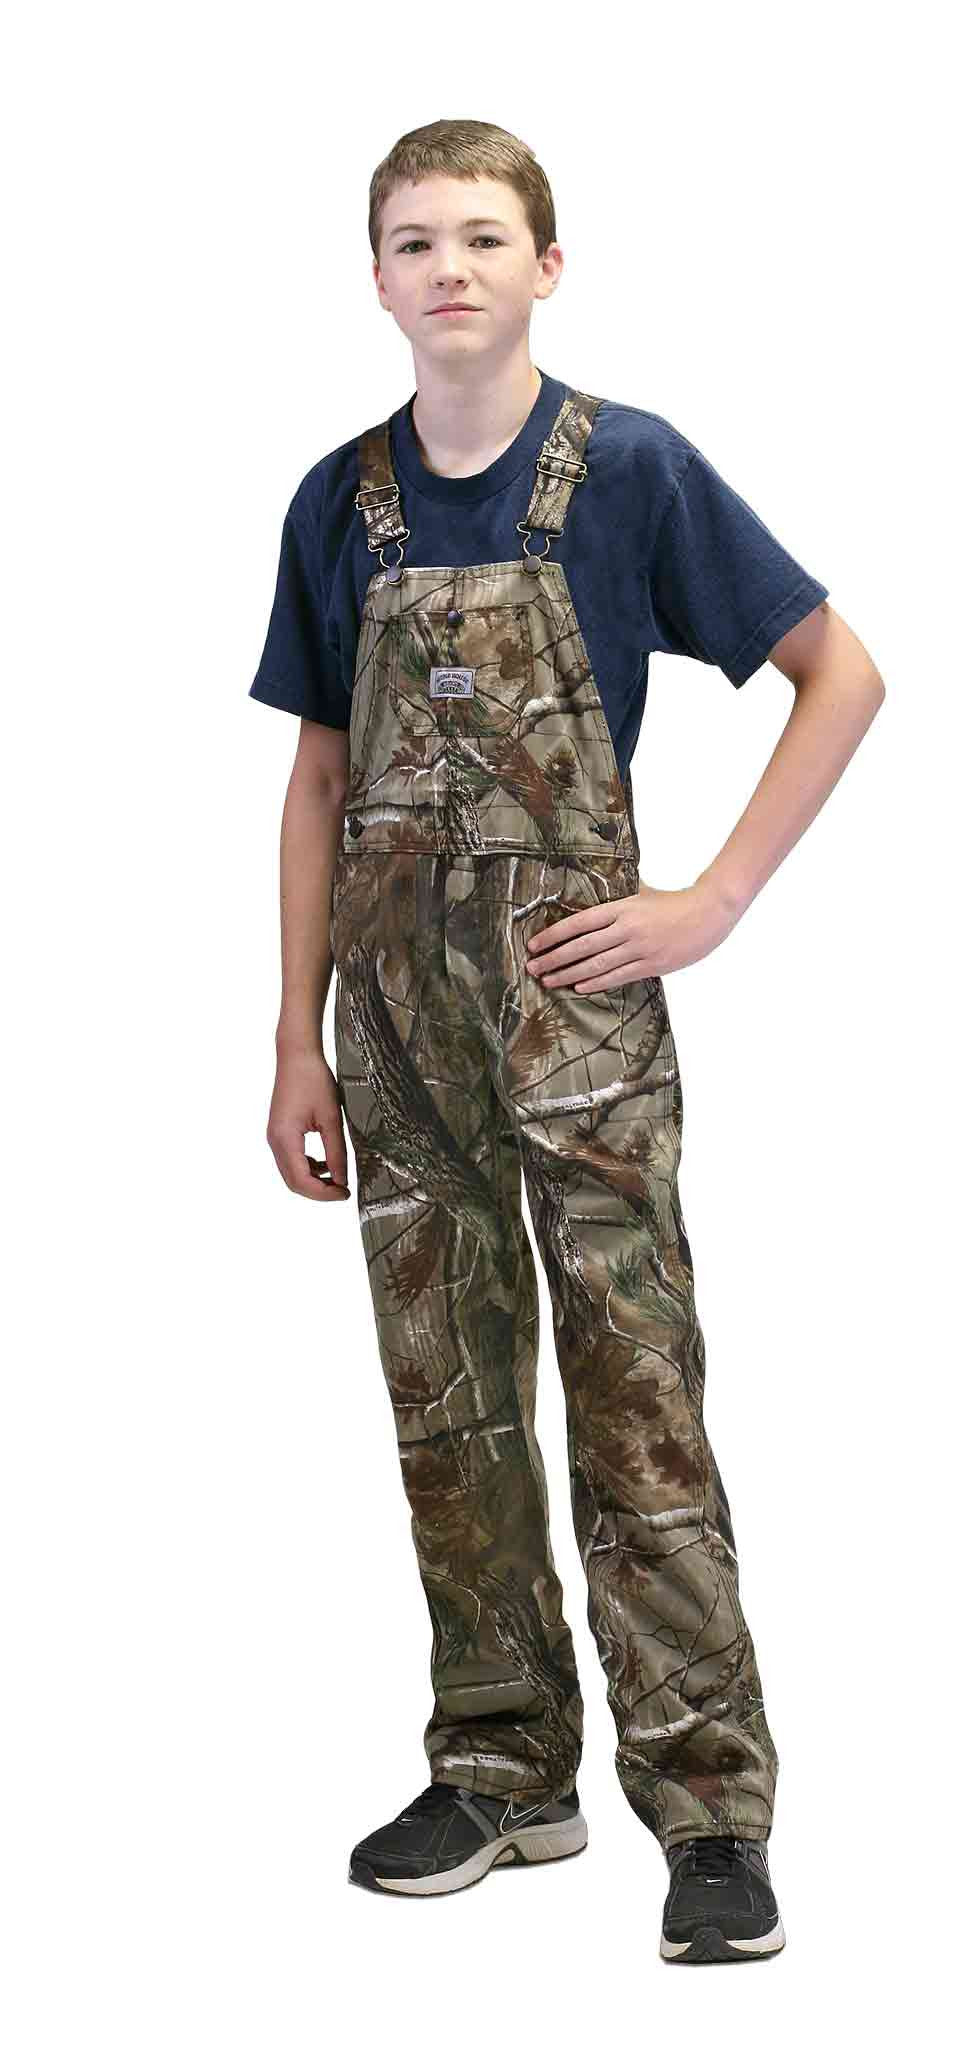 Made in USA Boys Realtree Camo Overall. American Made Kids